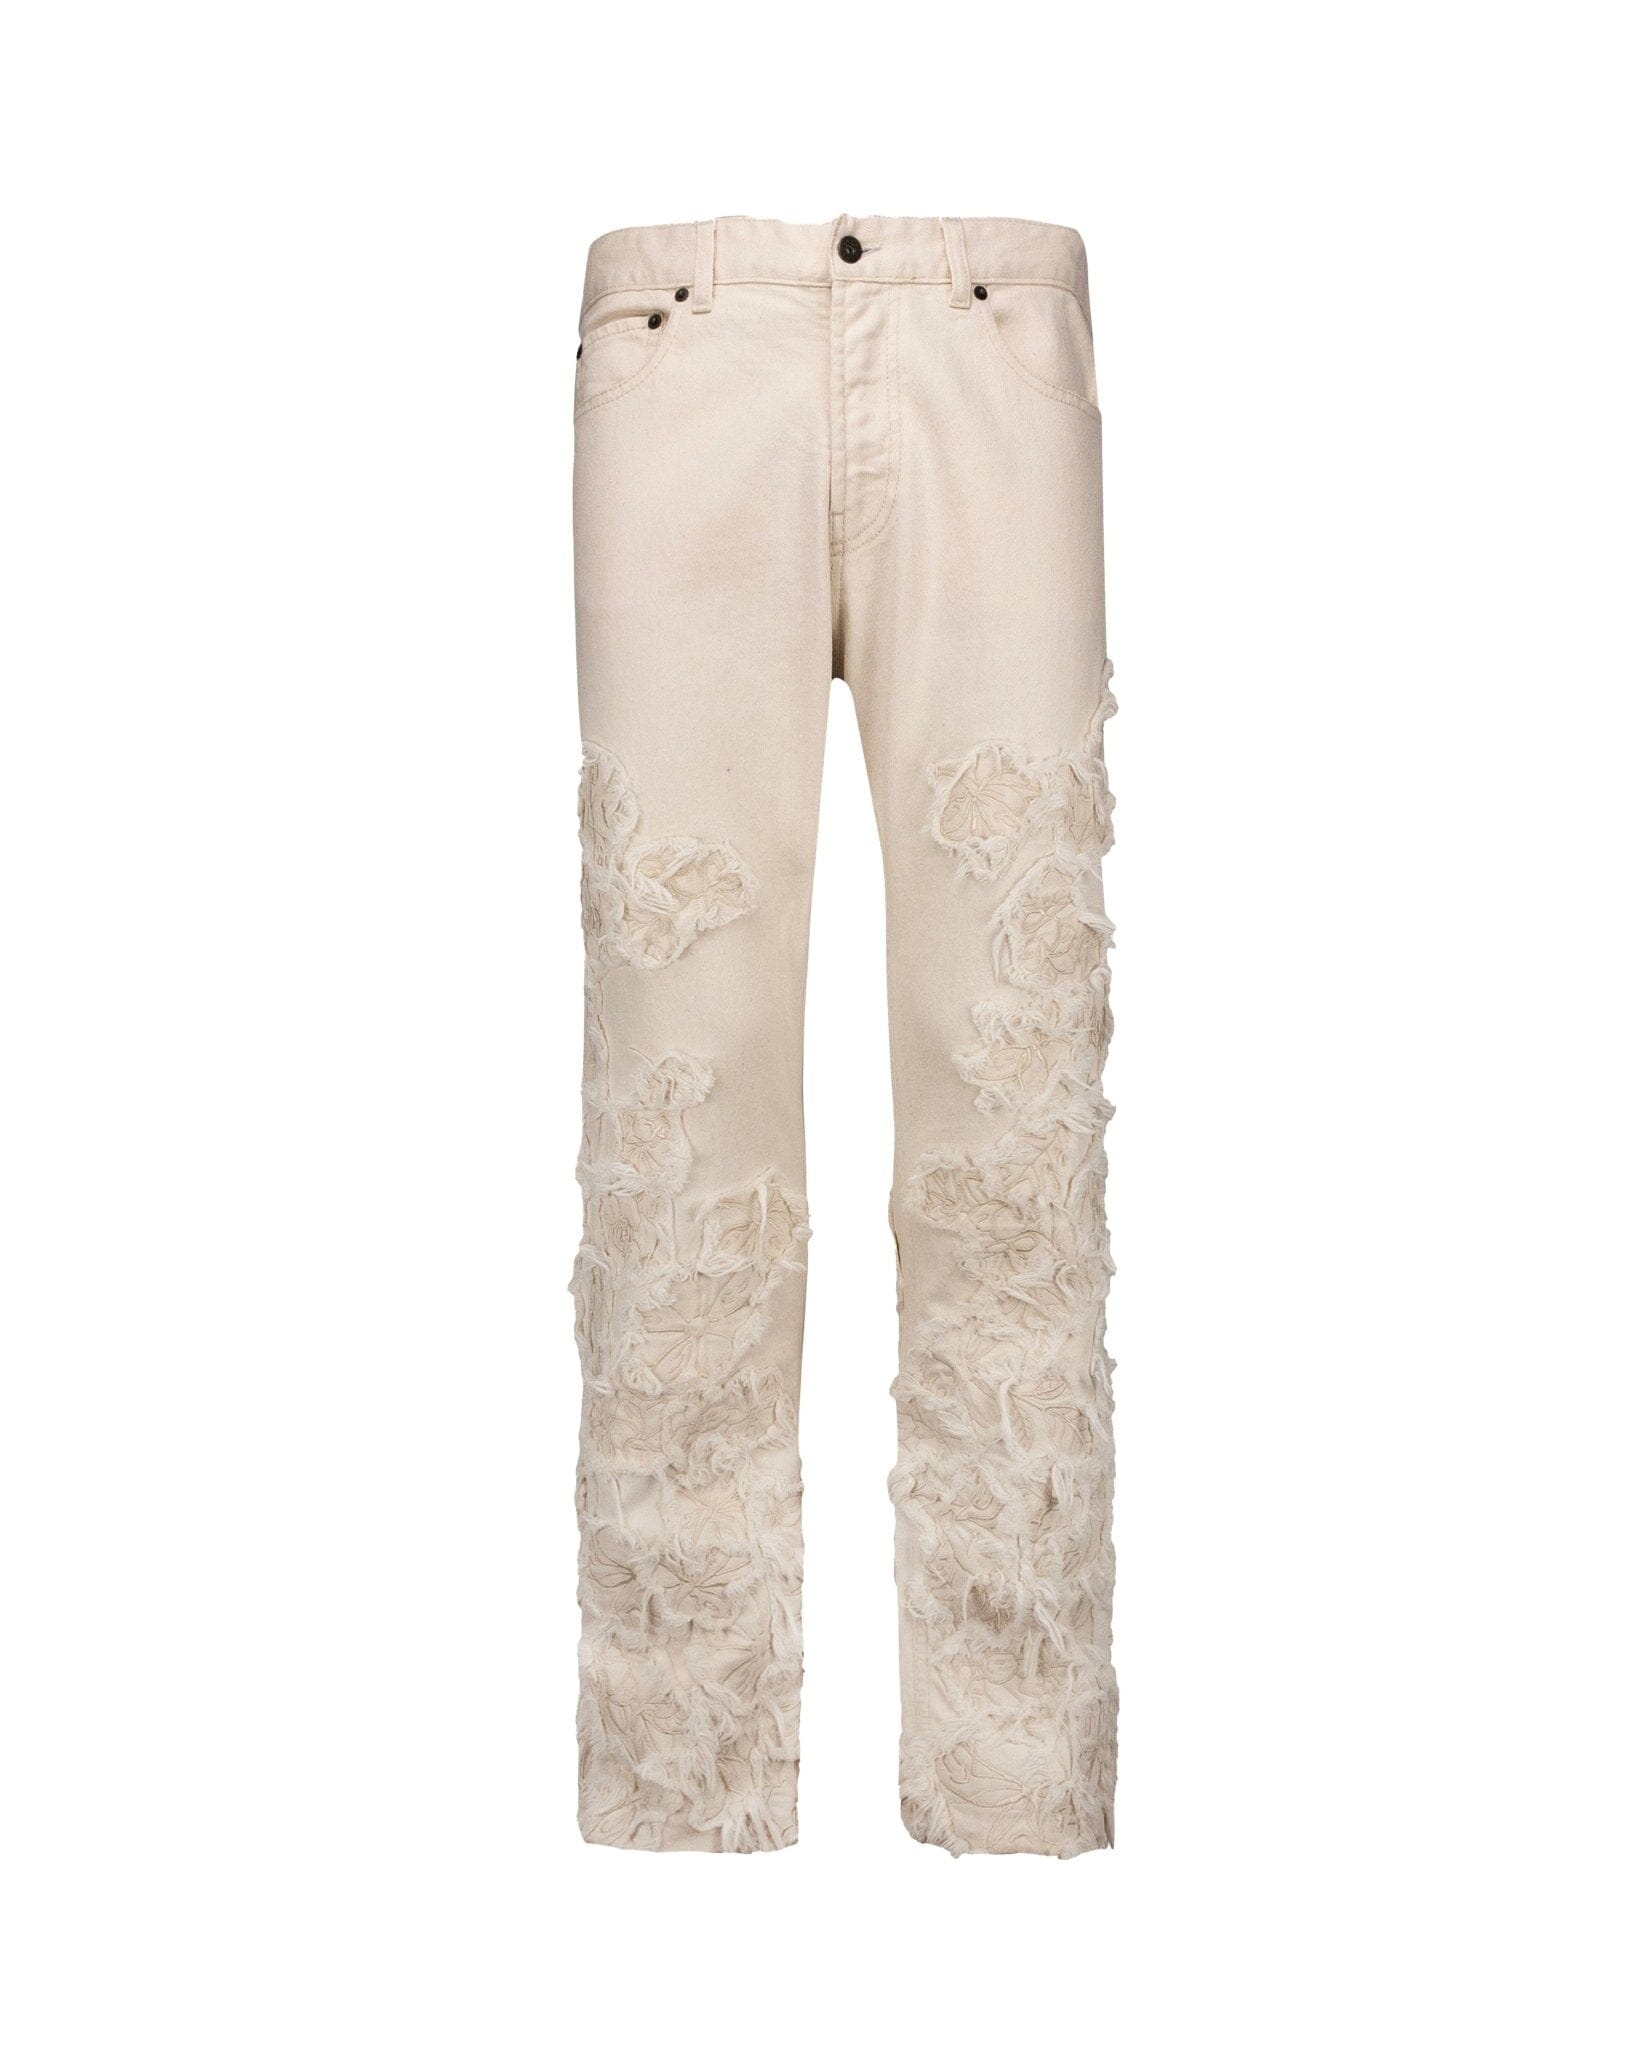 Jeans Straight Baggy Cream flowers embroidery